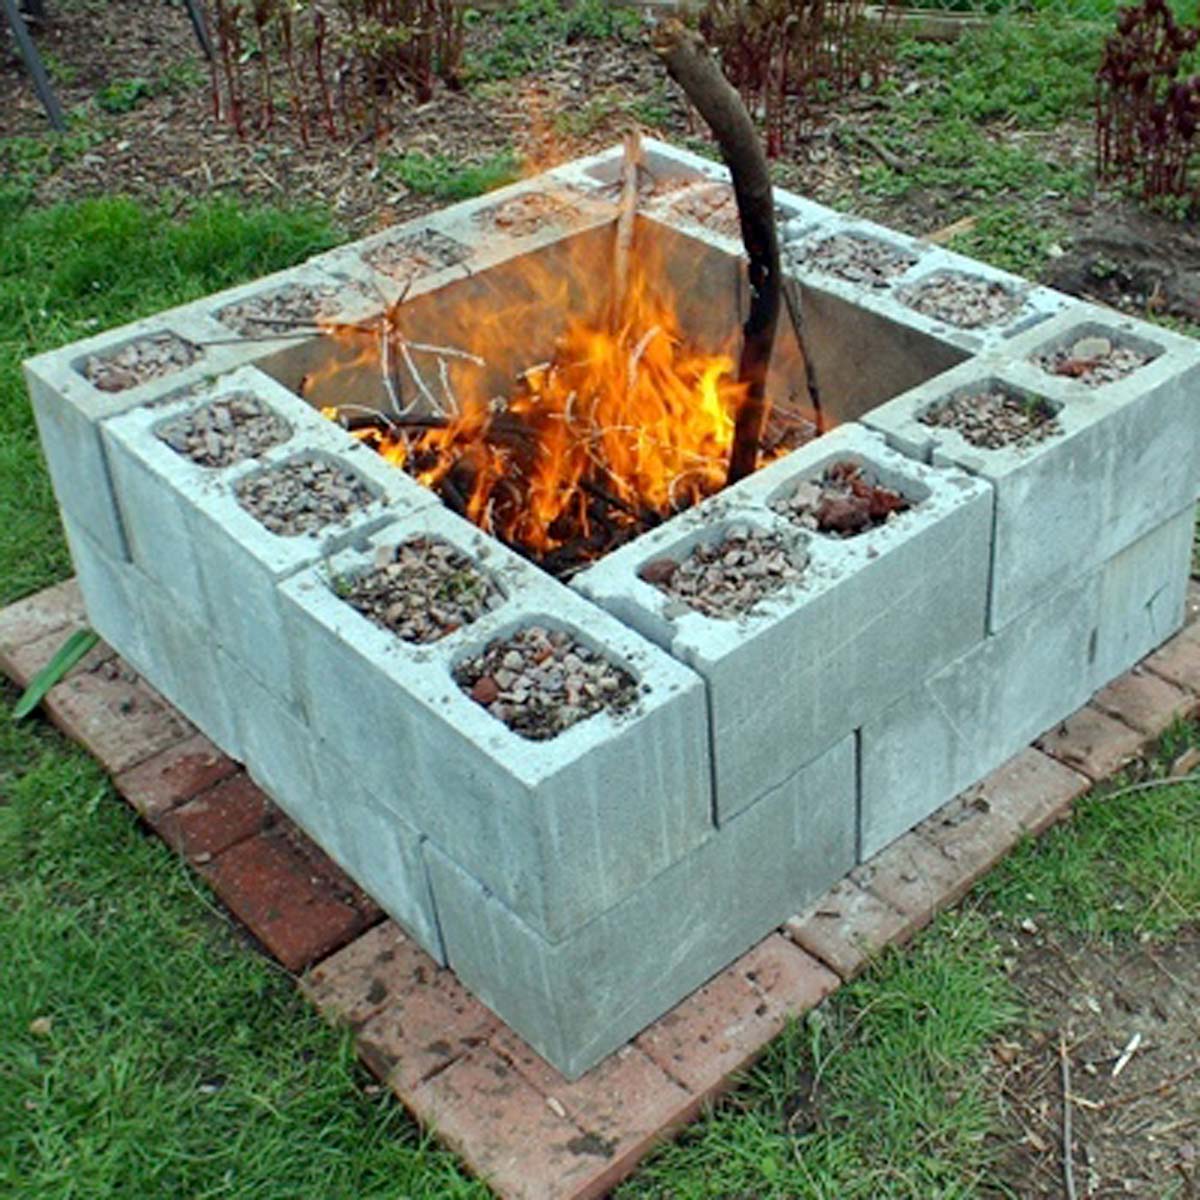 7 Really Cool Things You Can Make With Cheap Concrete Blocks